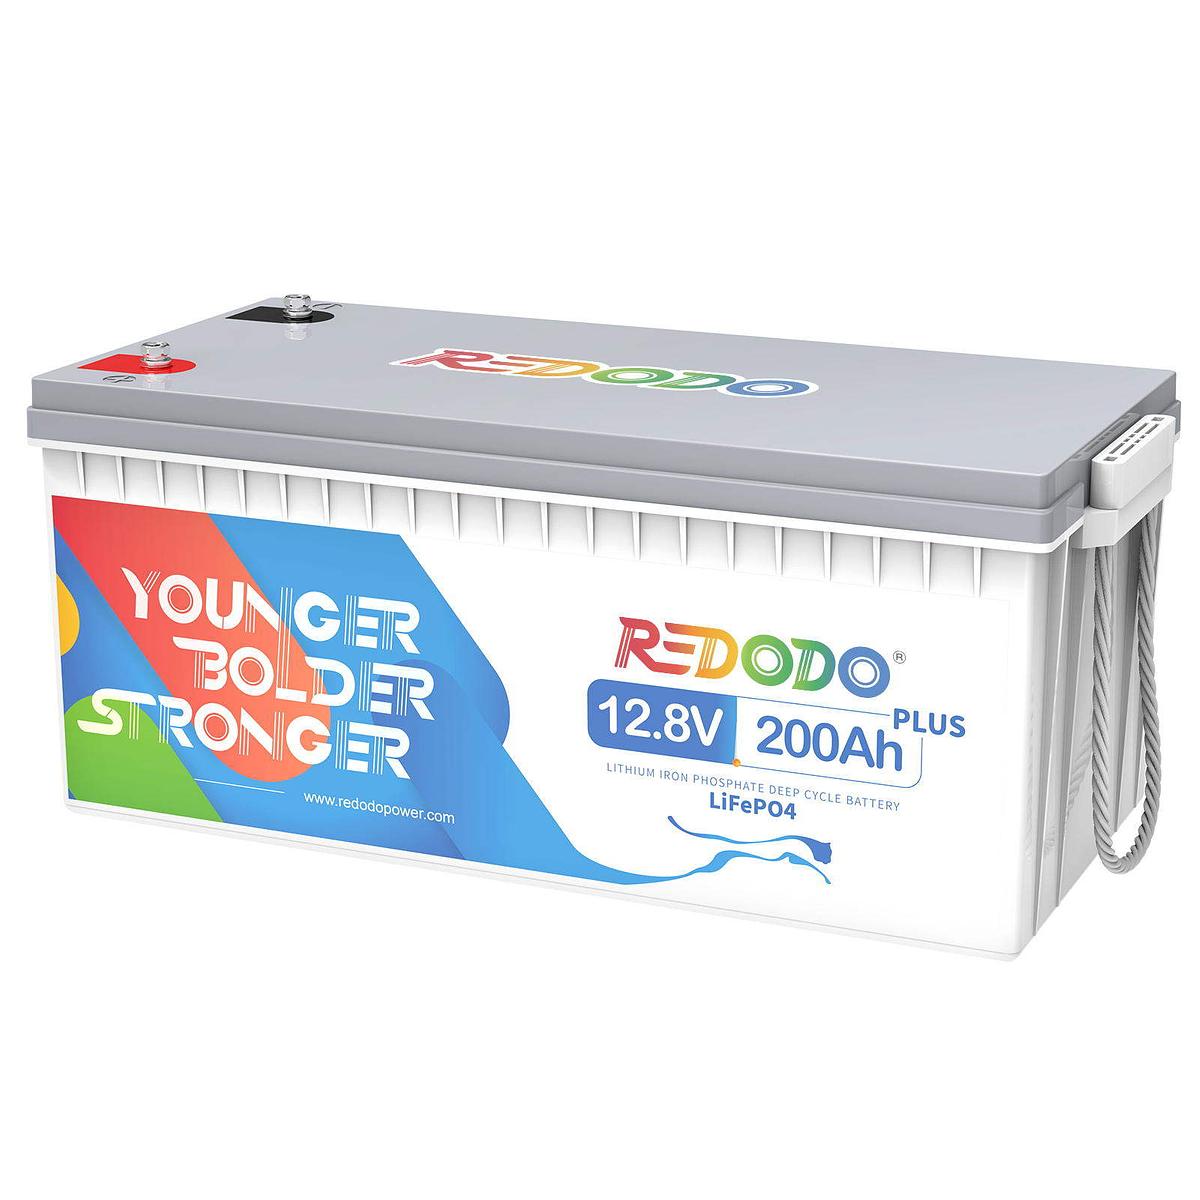 $509 Only 24hrsRedodo 12V 200Ah Plus LiFePO4 Battery | 2.56kWh &amp; 2.56kW